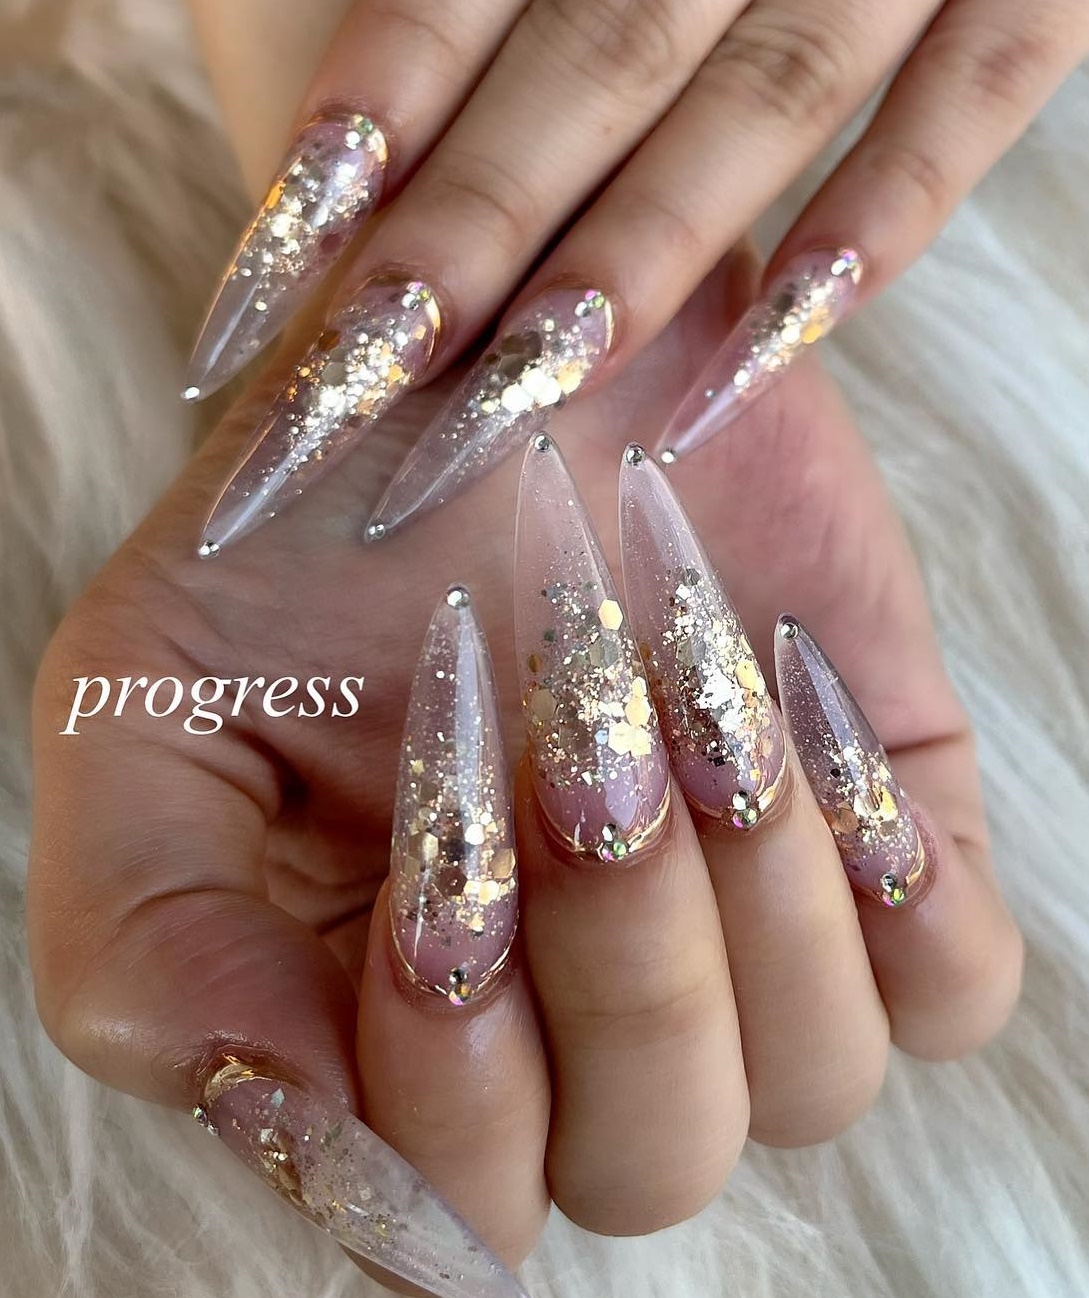 50 Super pretty nail art designs – Dying over these nails! 42